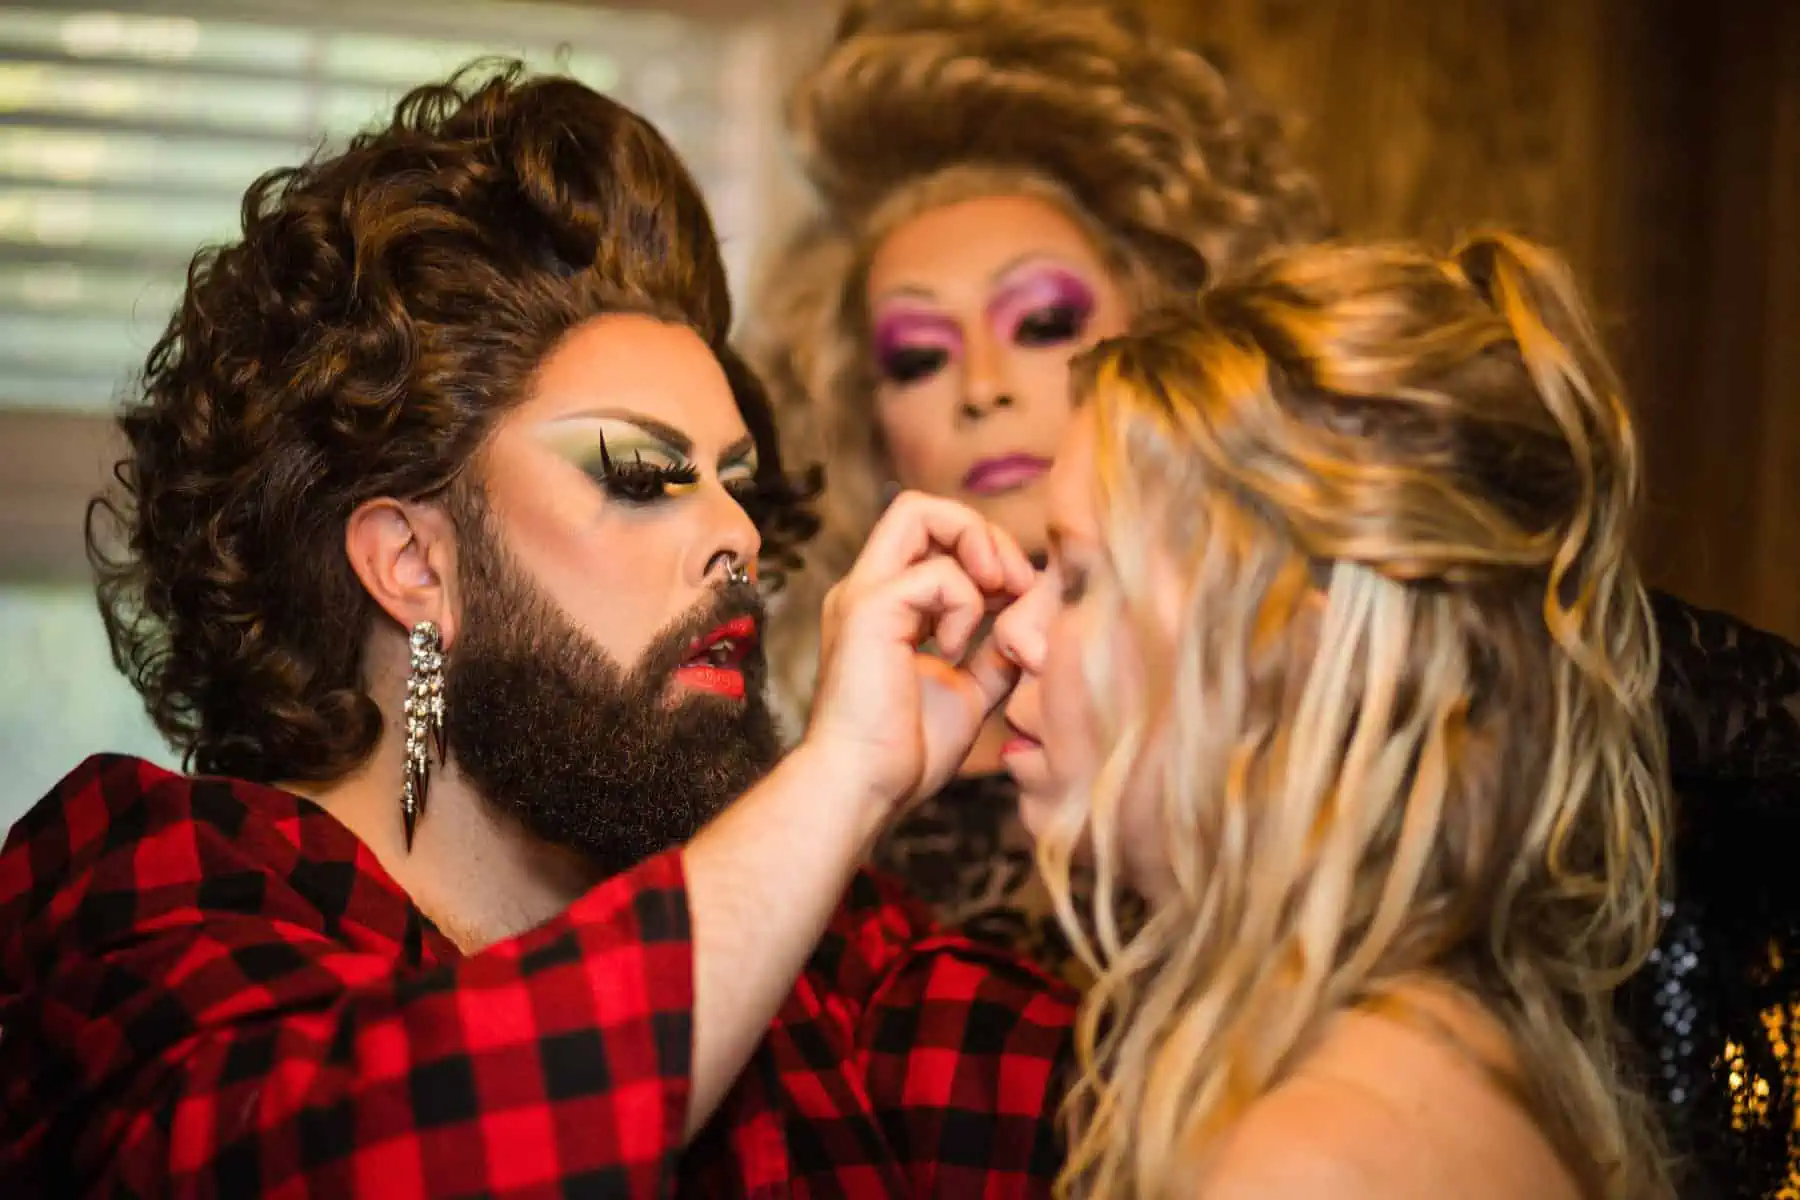 A woman is getting her makeup done by a man with a beard.